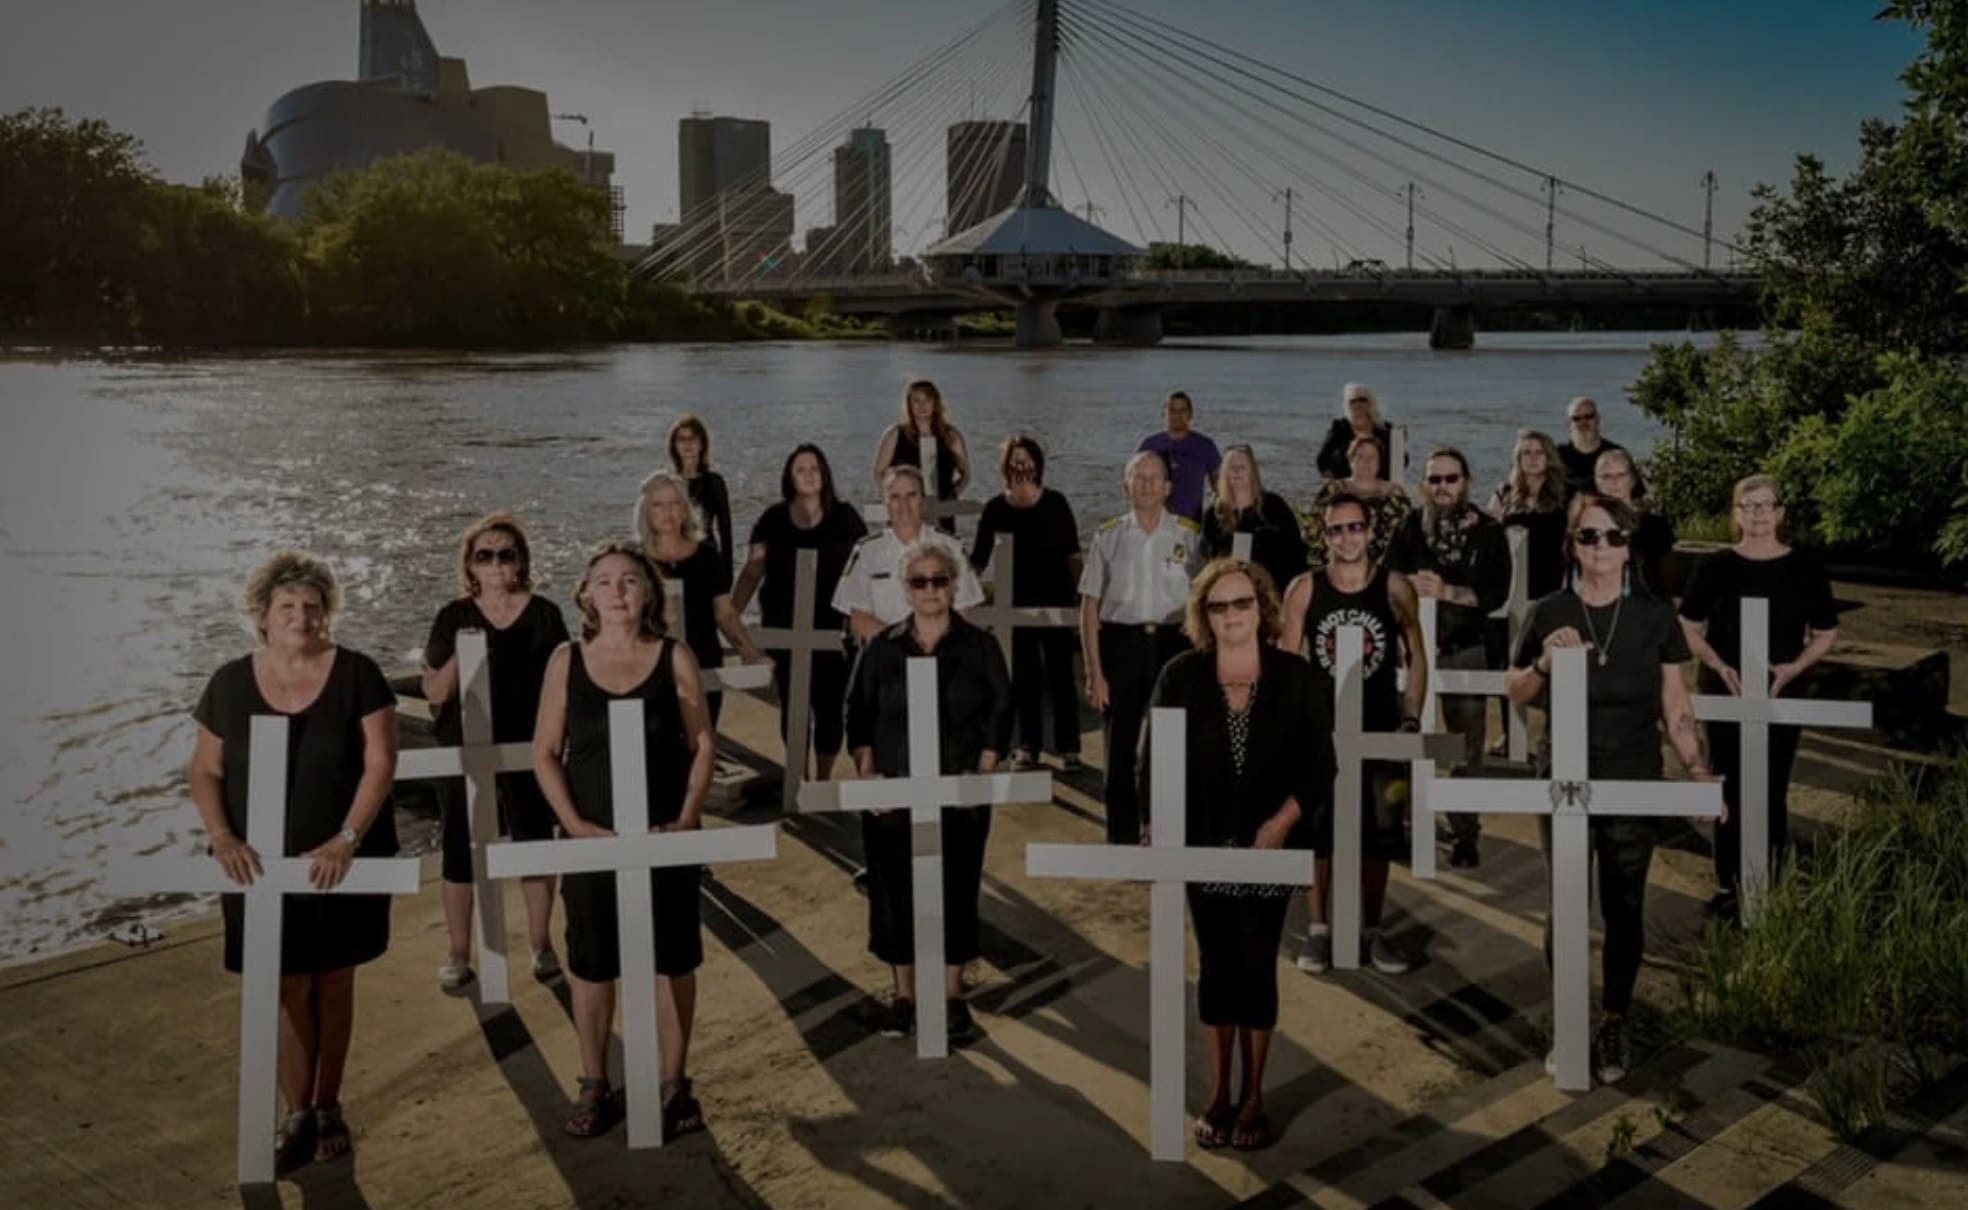 A group of mothers holding crosses wearnig black | moms stop the harm